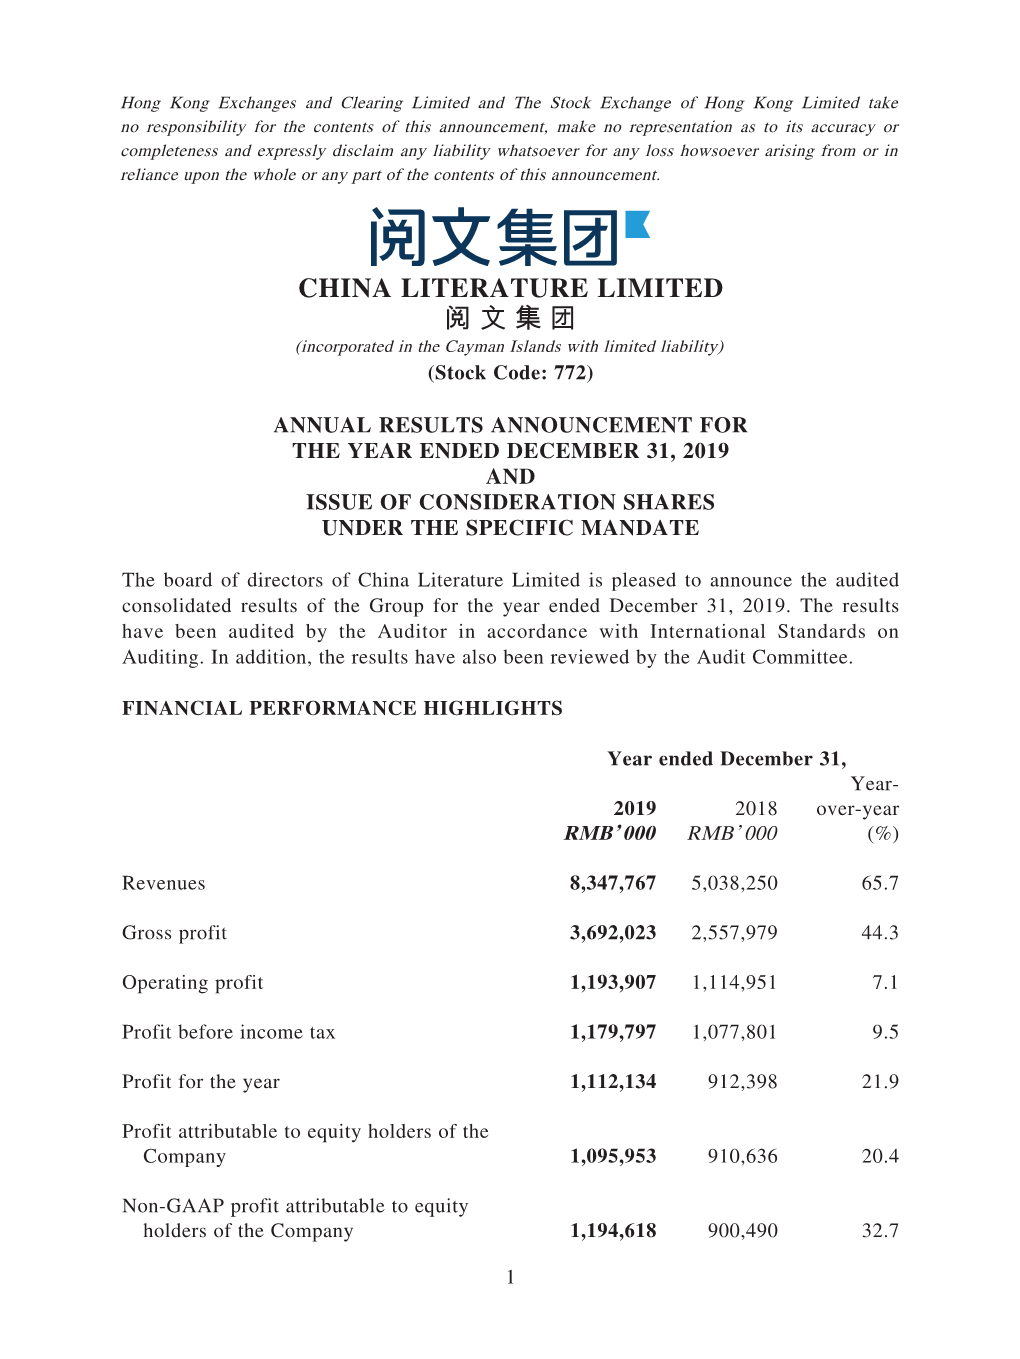 CHINA LITERATURE LIMITED 閱文集團 (Incorporated in the Cayman Islands with Limited Liability) (Stock Code: 772)